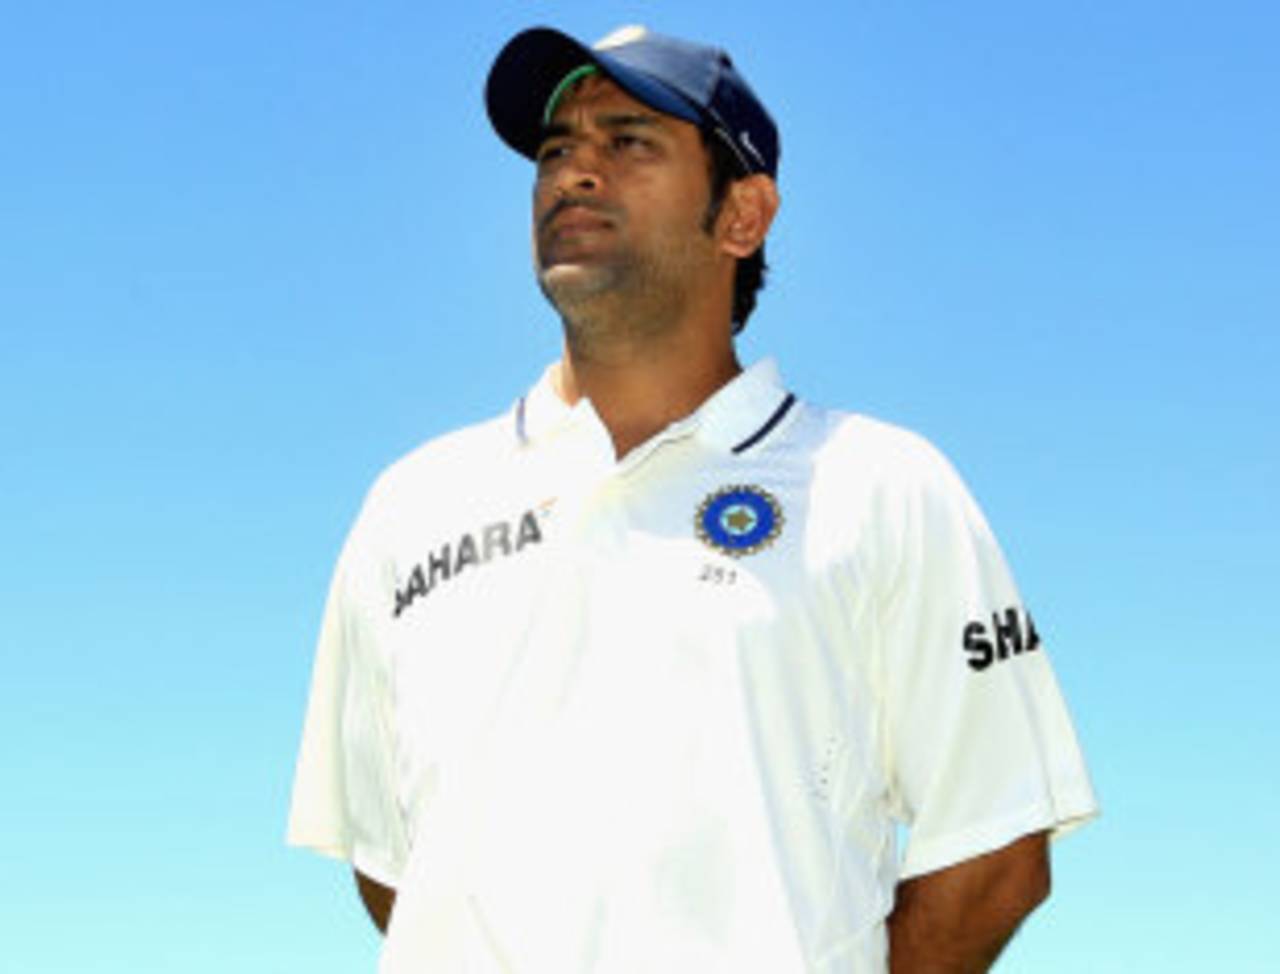 MS Dhoni at the presentation ceremony after the Perth Test, Australia v India, 3rd Test, Perth, 3rd day, January 15, 2012